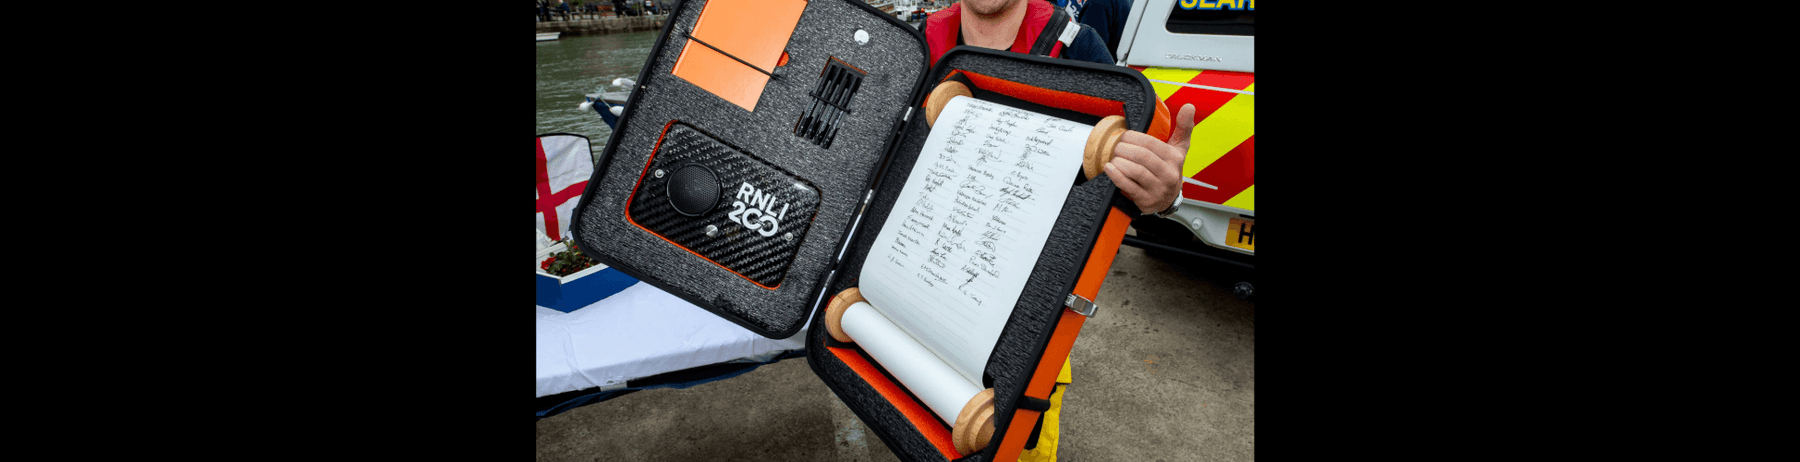 The RNLI bicentenary scroll on tour